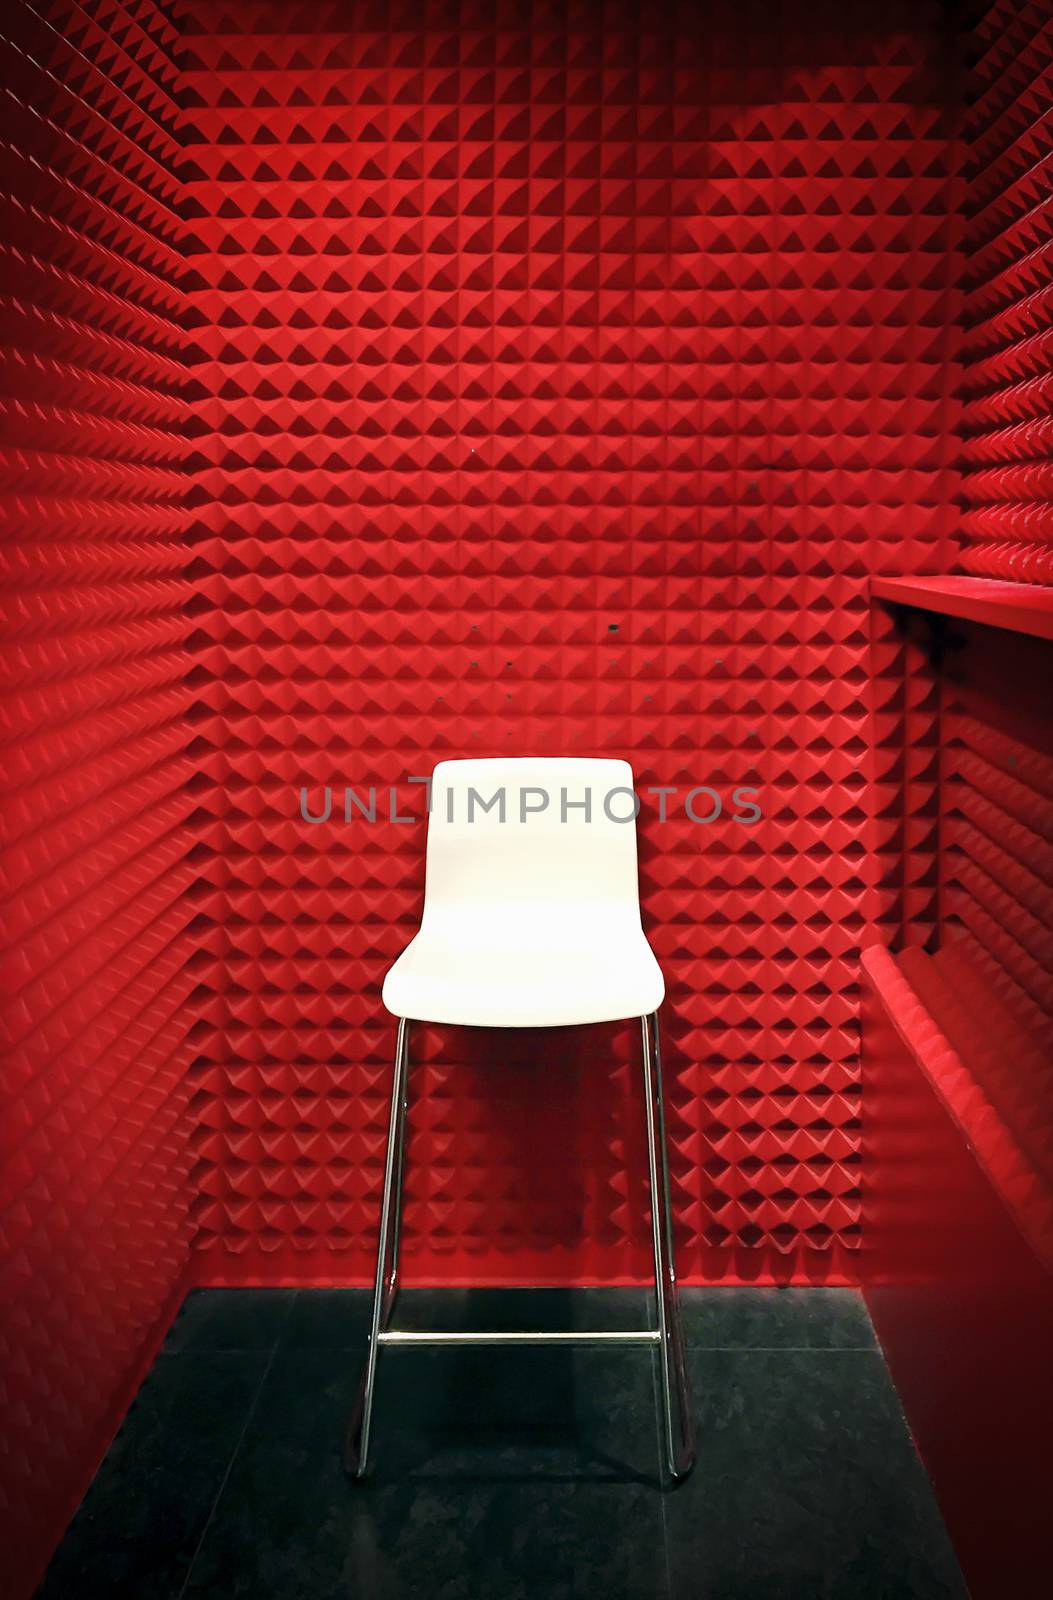 white stool in a red cabin with foam soundproof panels